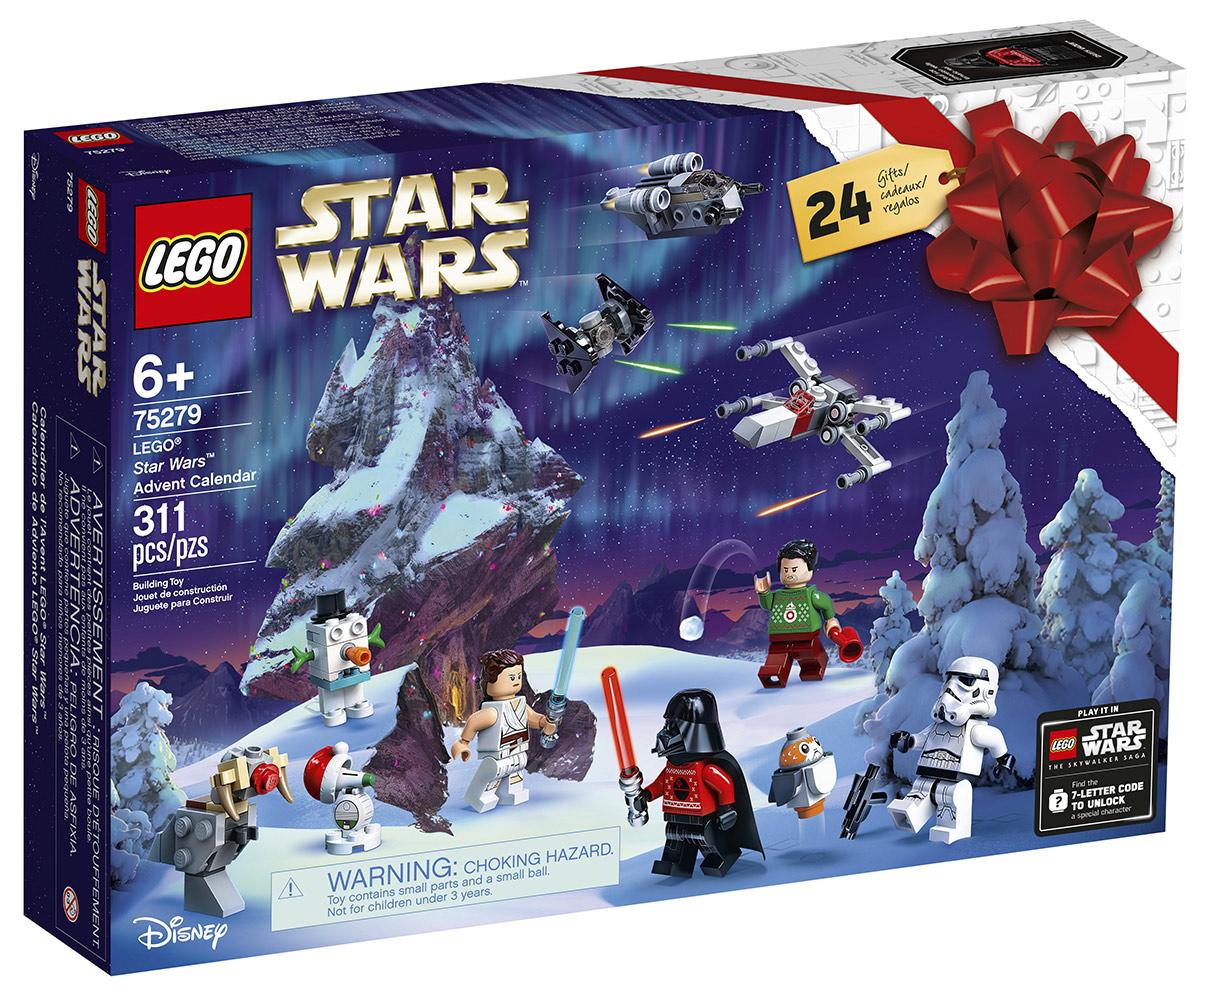 LEGO Building Sets Buy One Get One 40% Off